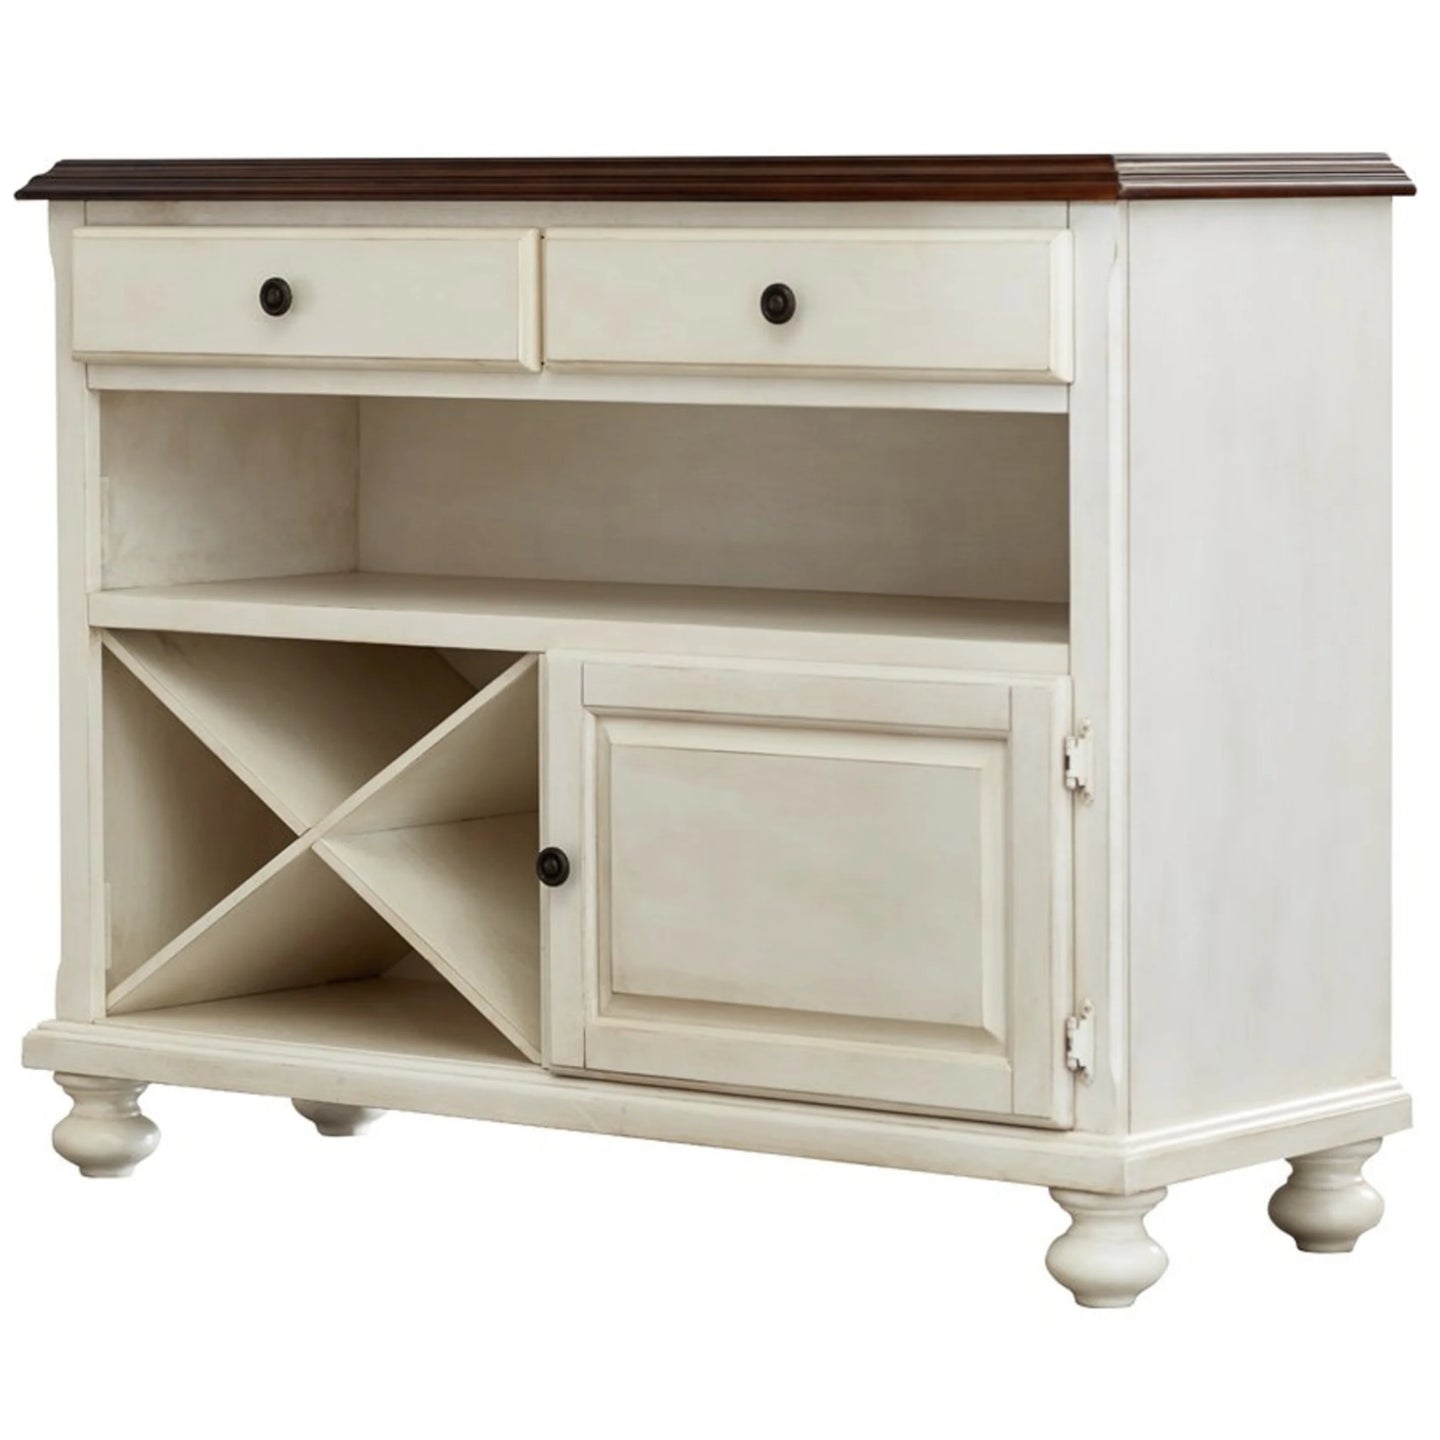 Sunset Trading Andrews Server | Antique White with Chestnut Brown Top